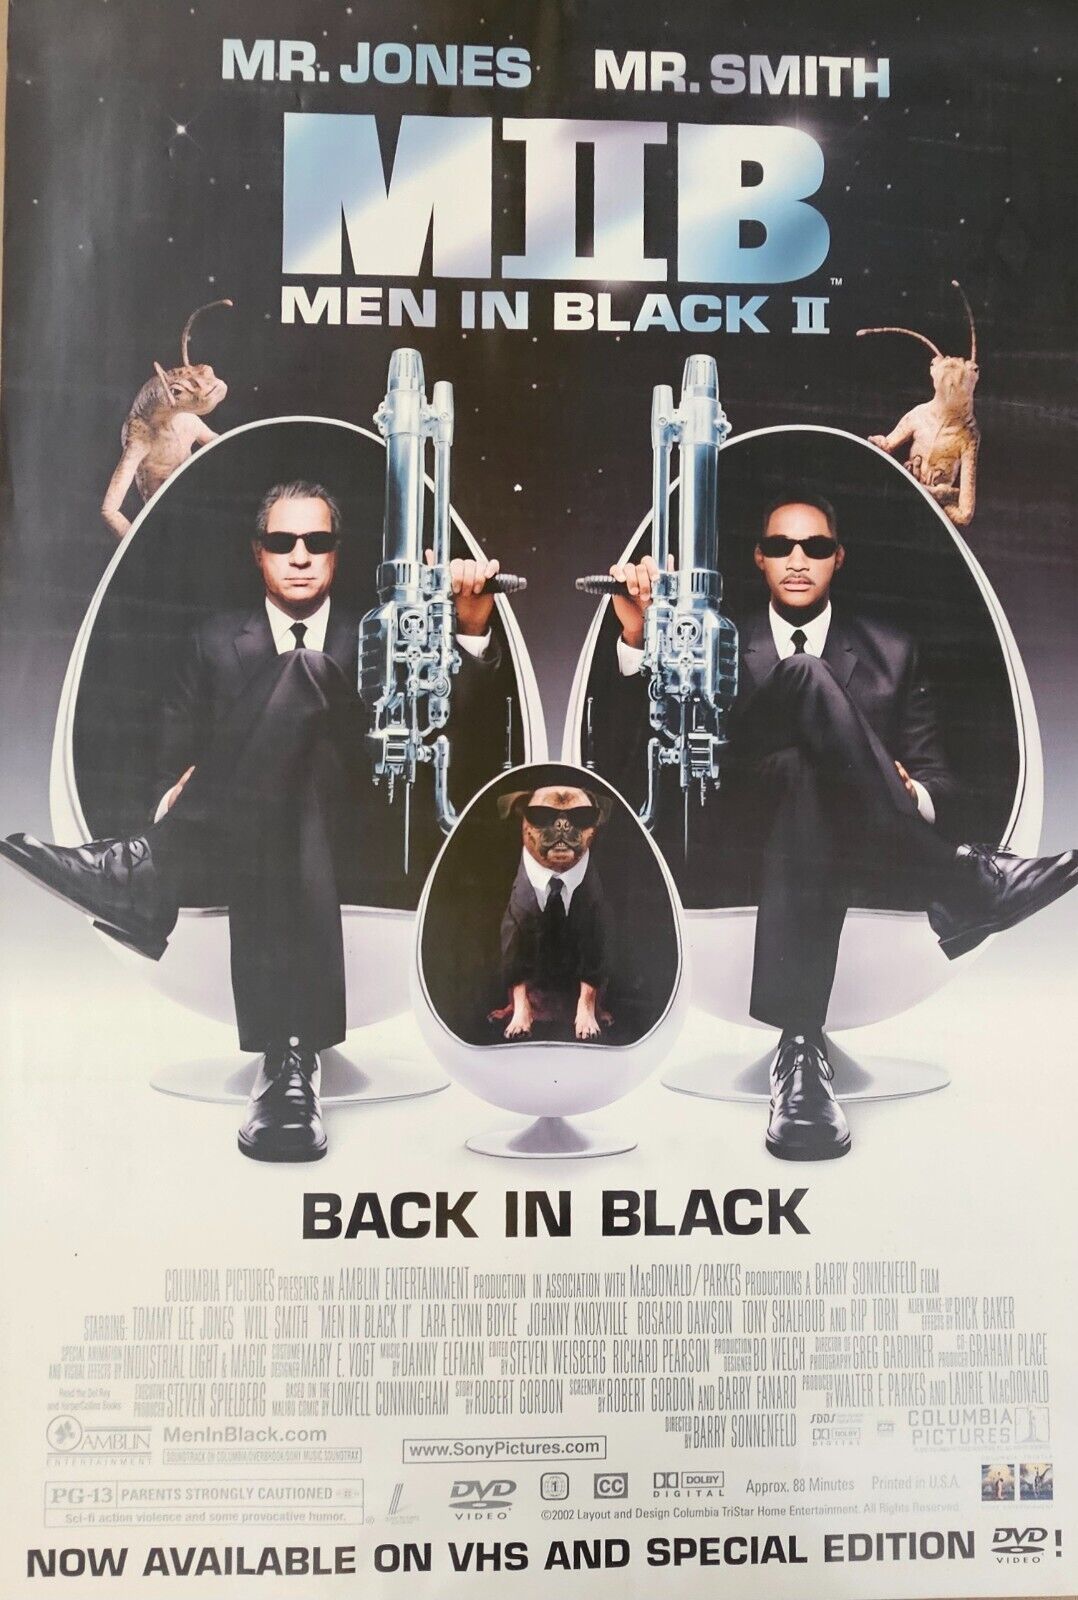 Tommy Lee Jones and Will Smith in MEN IN BLACK 2  27 X 40  DVD movie poster